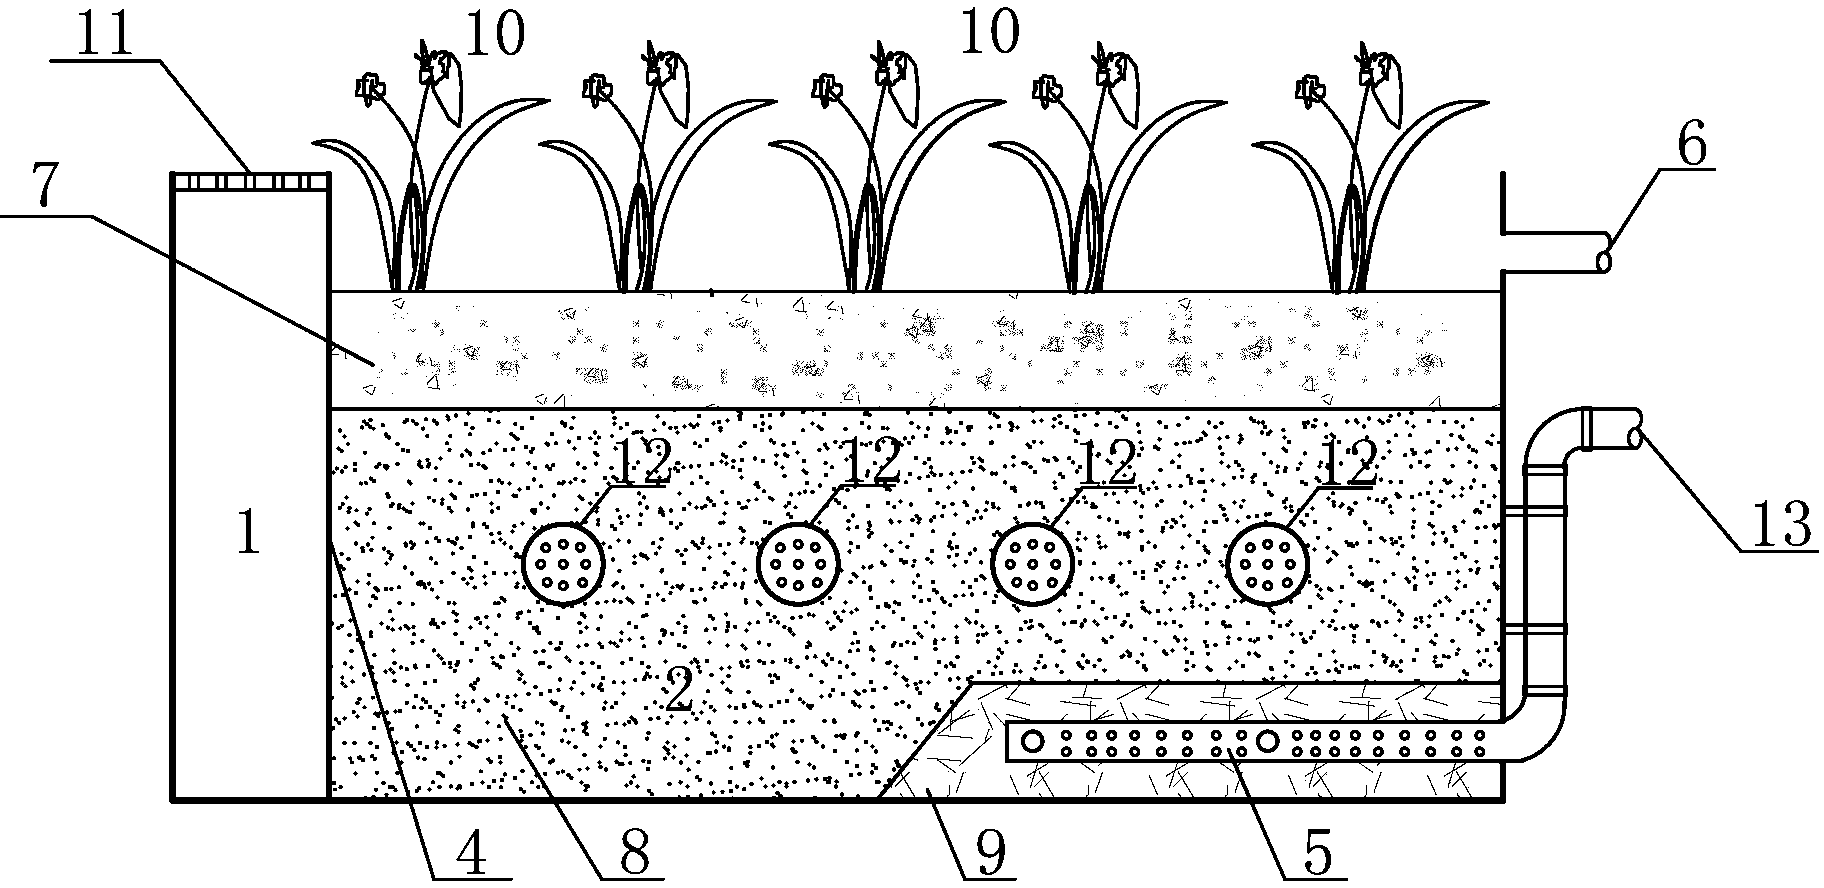 Overland runoff rainwater storing and purifying integrated device with flooded culvert pipes and overland runoff rainwater storing and purifying method